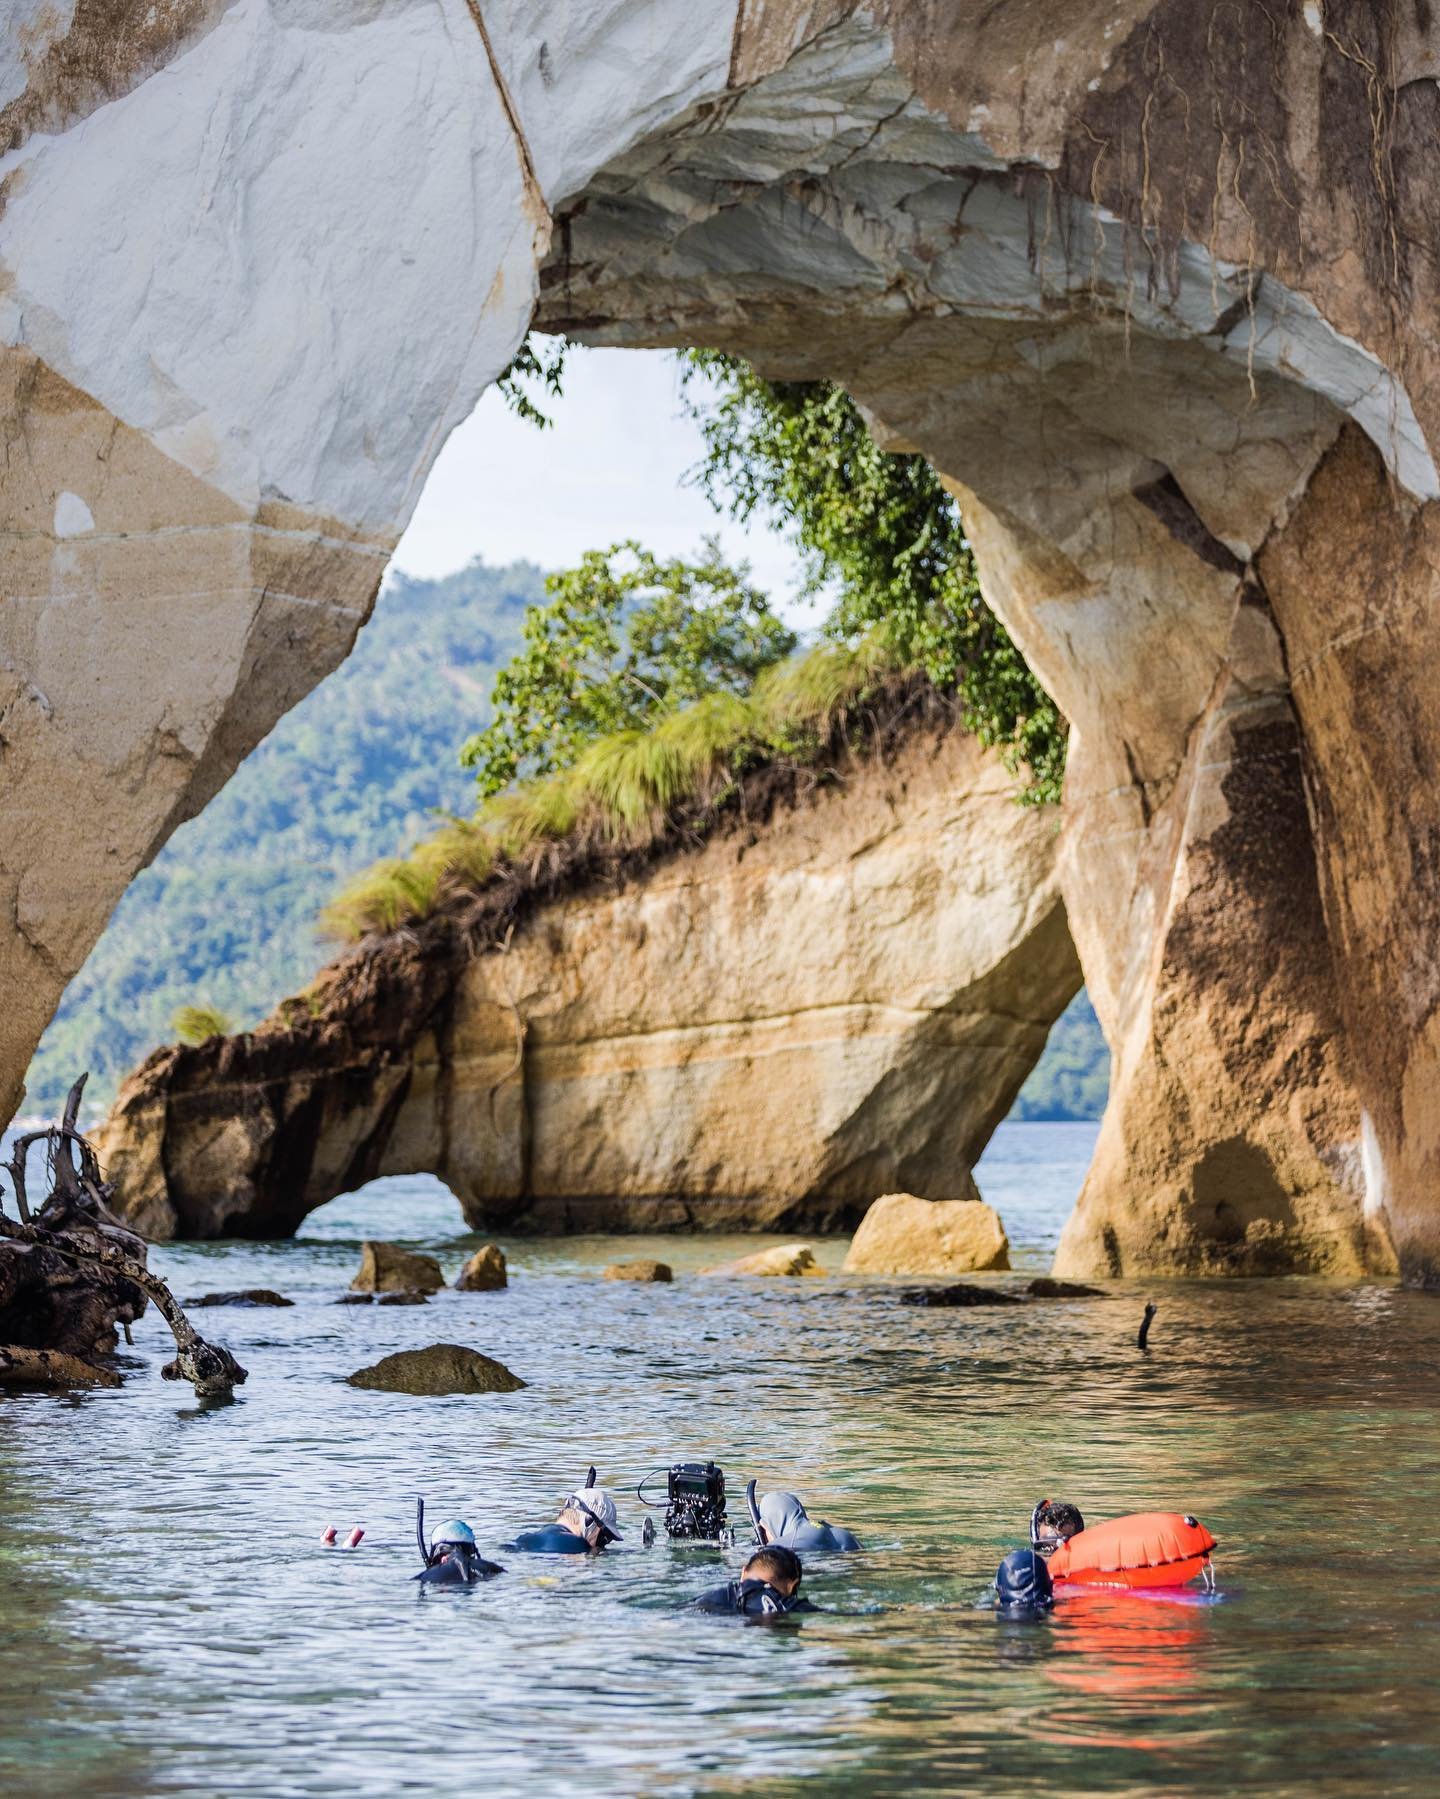 A couple of behind-the-scenes snaps from Sulawesi shooting the Mimic and Coconut octopus for #SecretsOfTheOctopus. 🥥 🐙 🌴 

1. The team shooting underneath the Serena arch, a natural rock formation which has actually collapsed since this photo was 